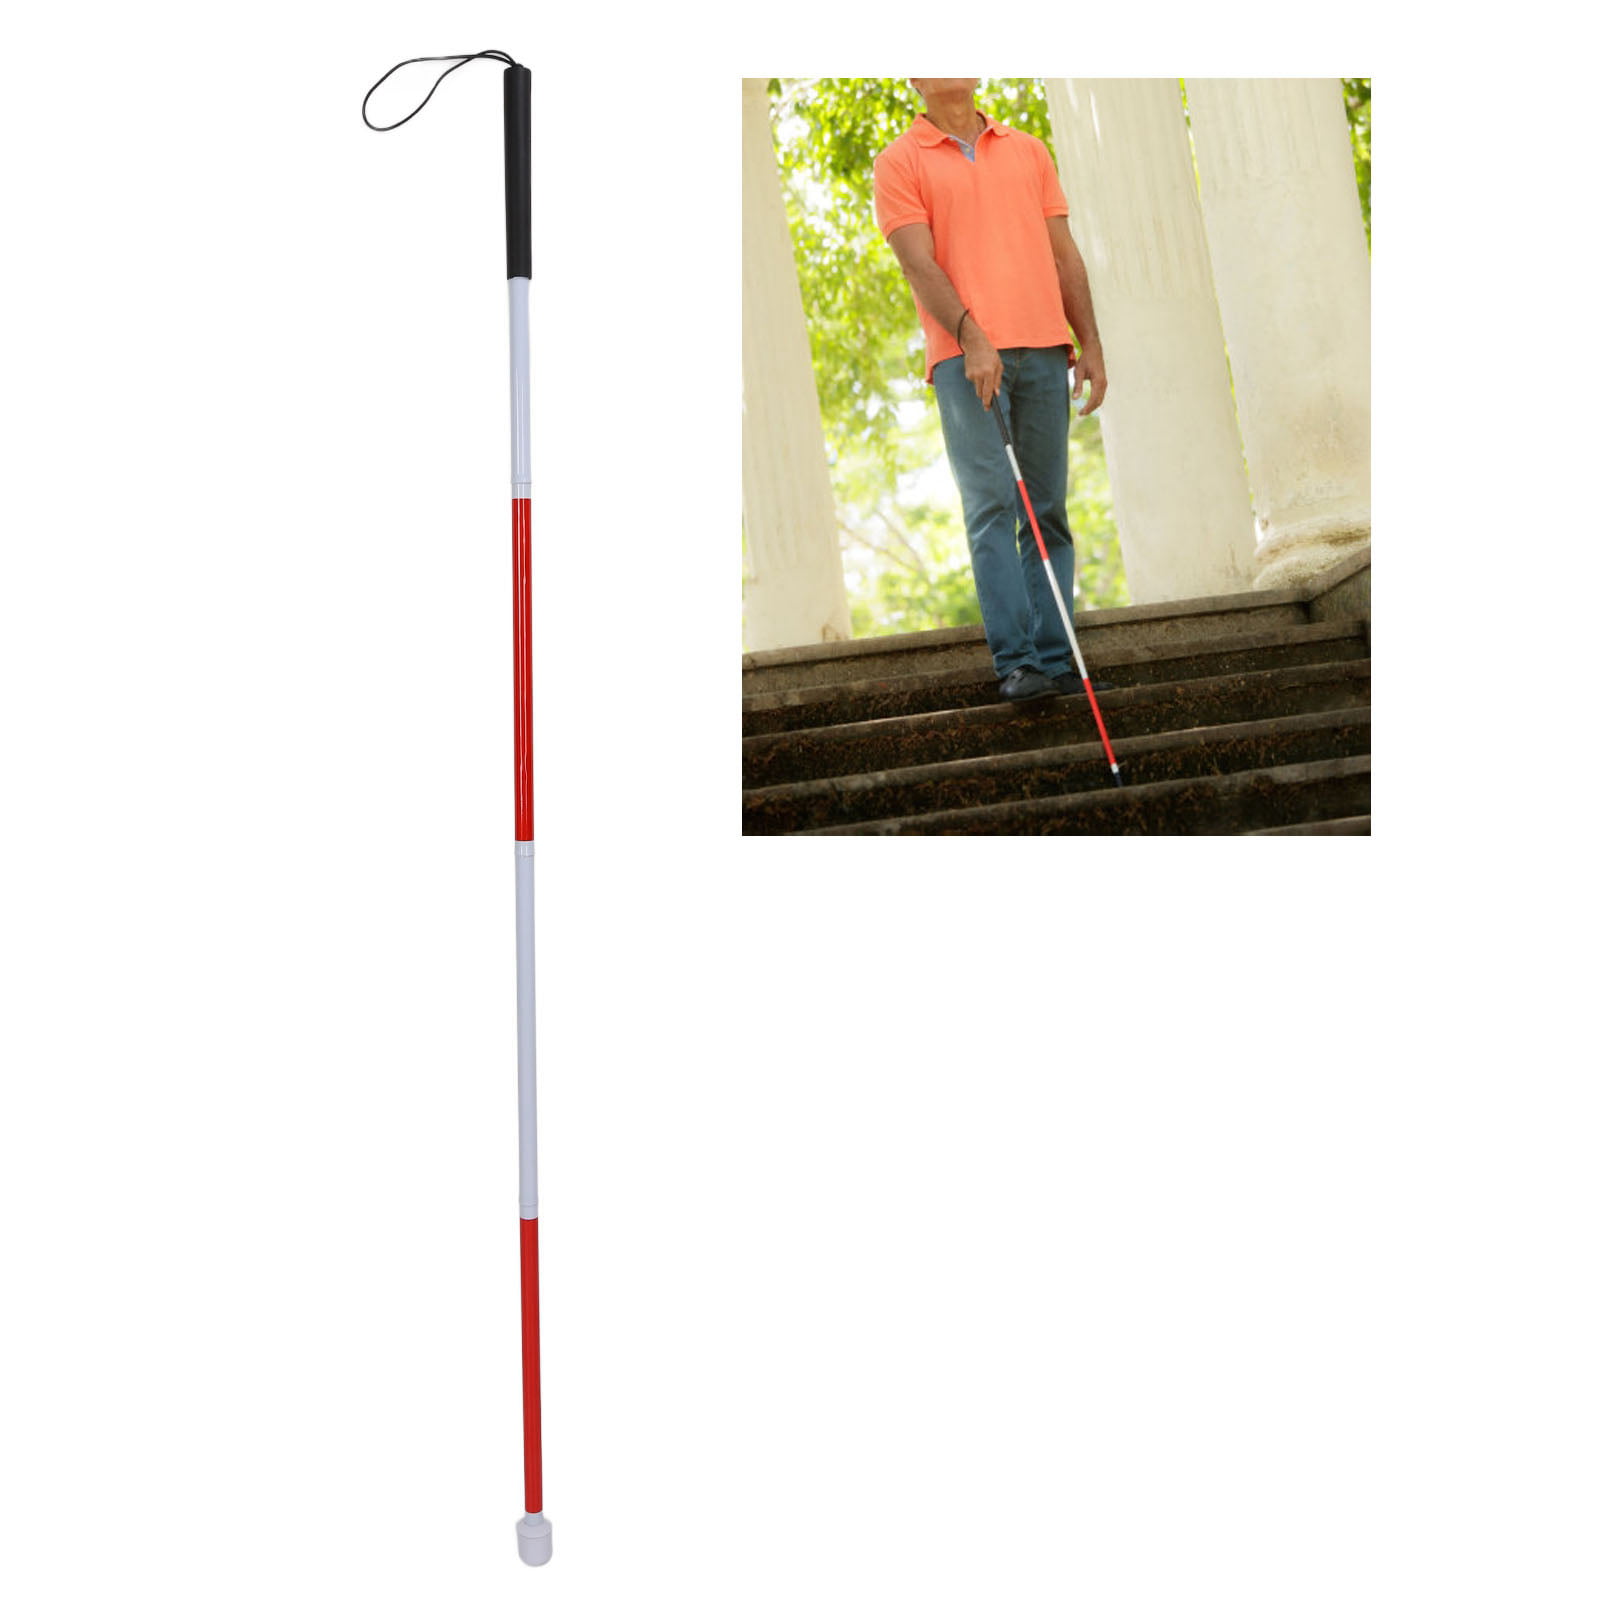 Ecoyyzn Blind Guide Cane Aluminum Alloy Portable Folding Walking Stick for  Vision Impaired and Blind People,Folding Walking Stick 